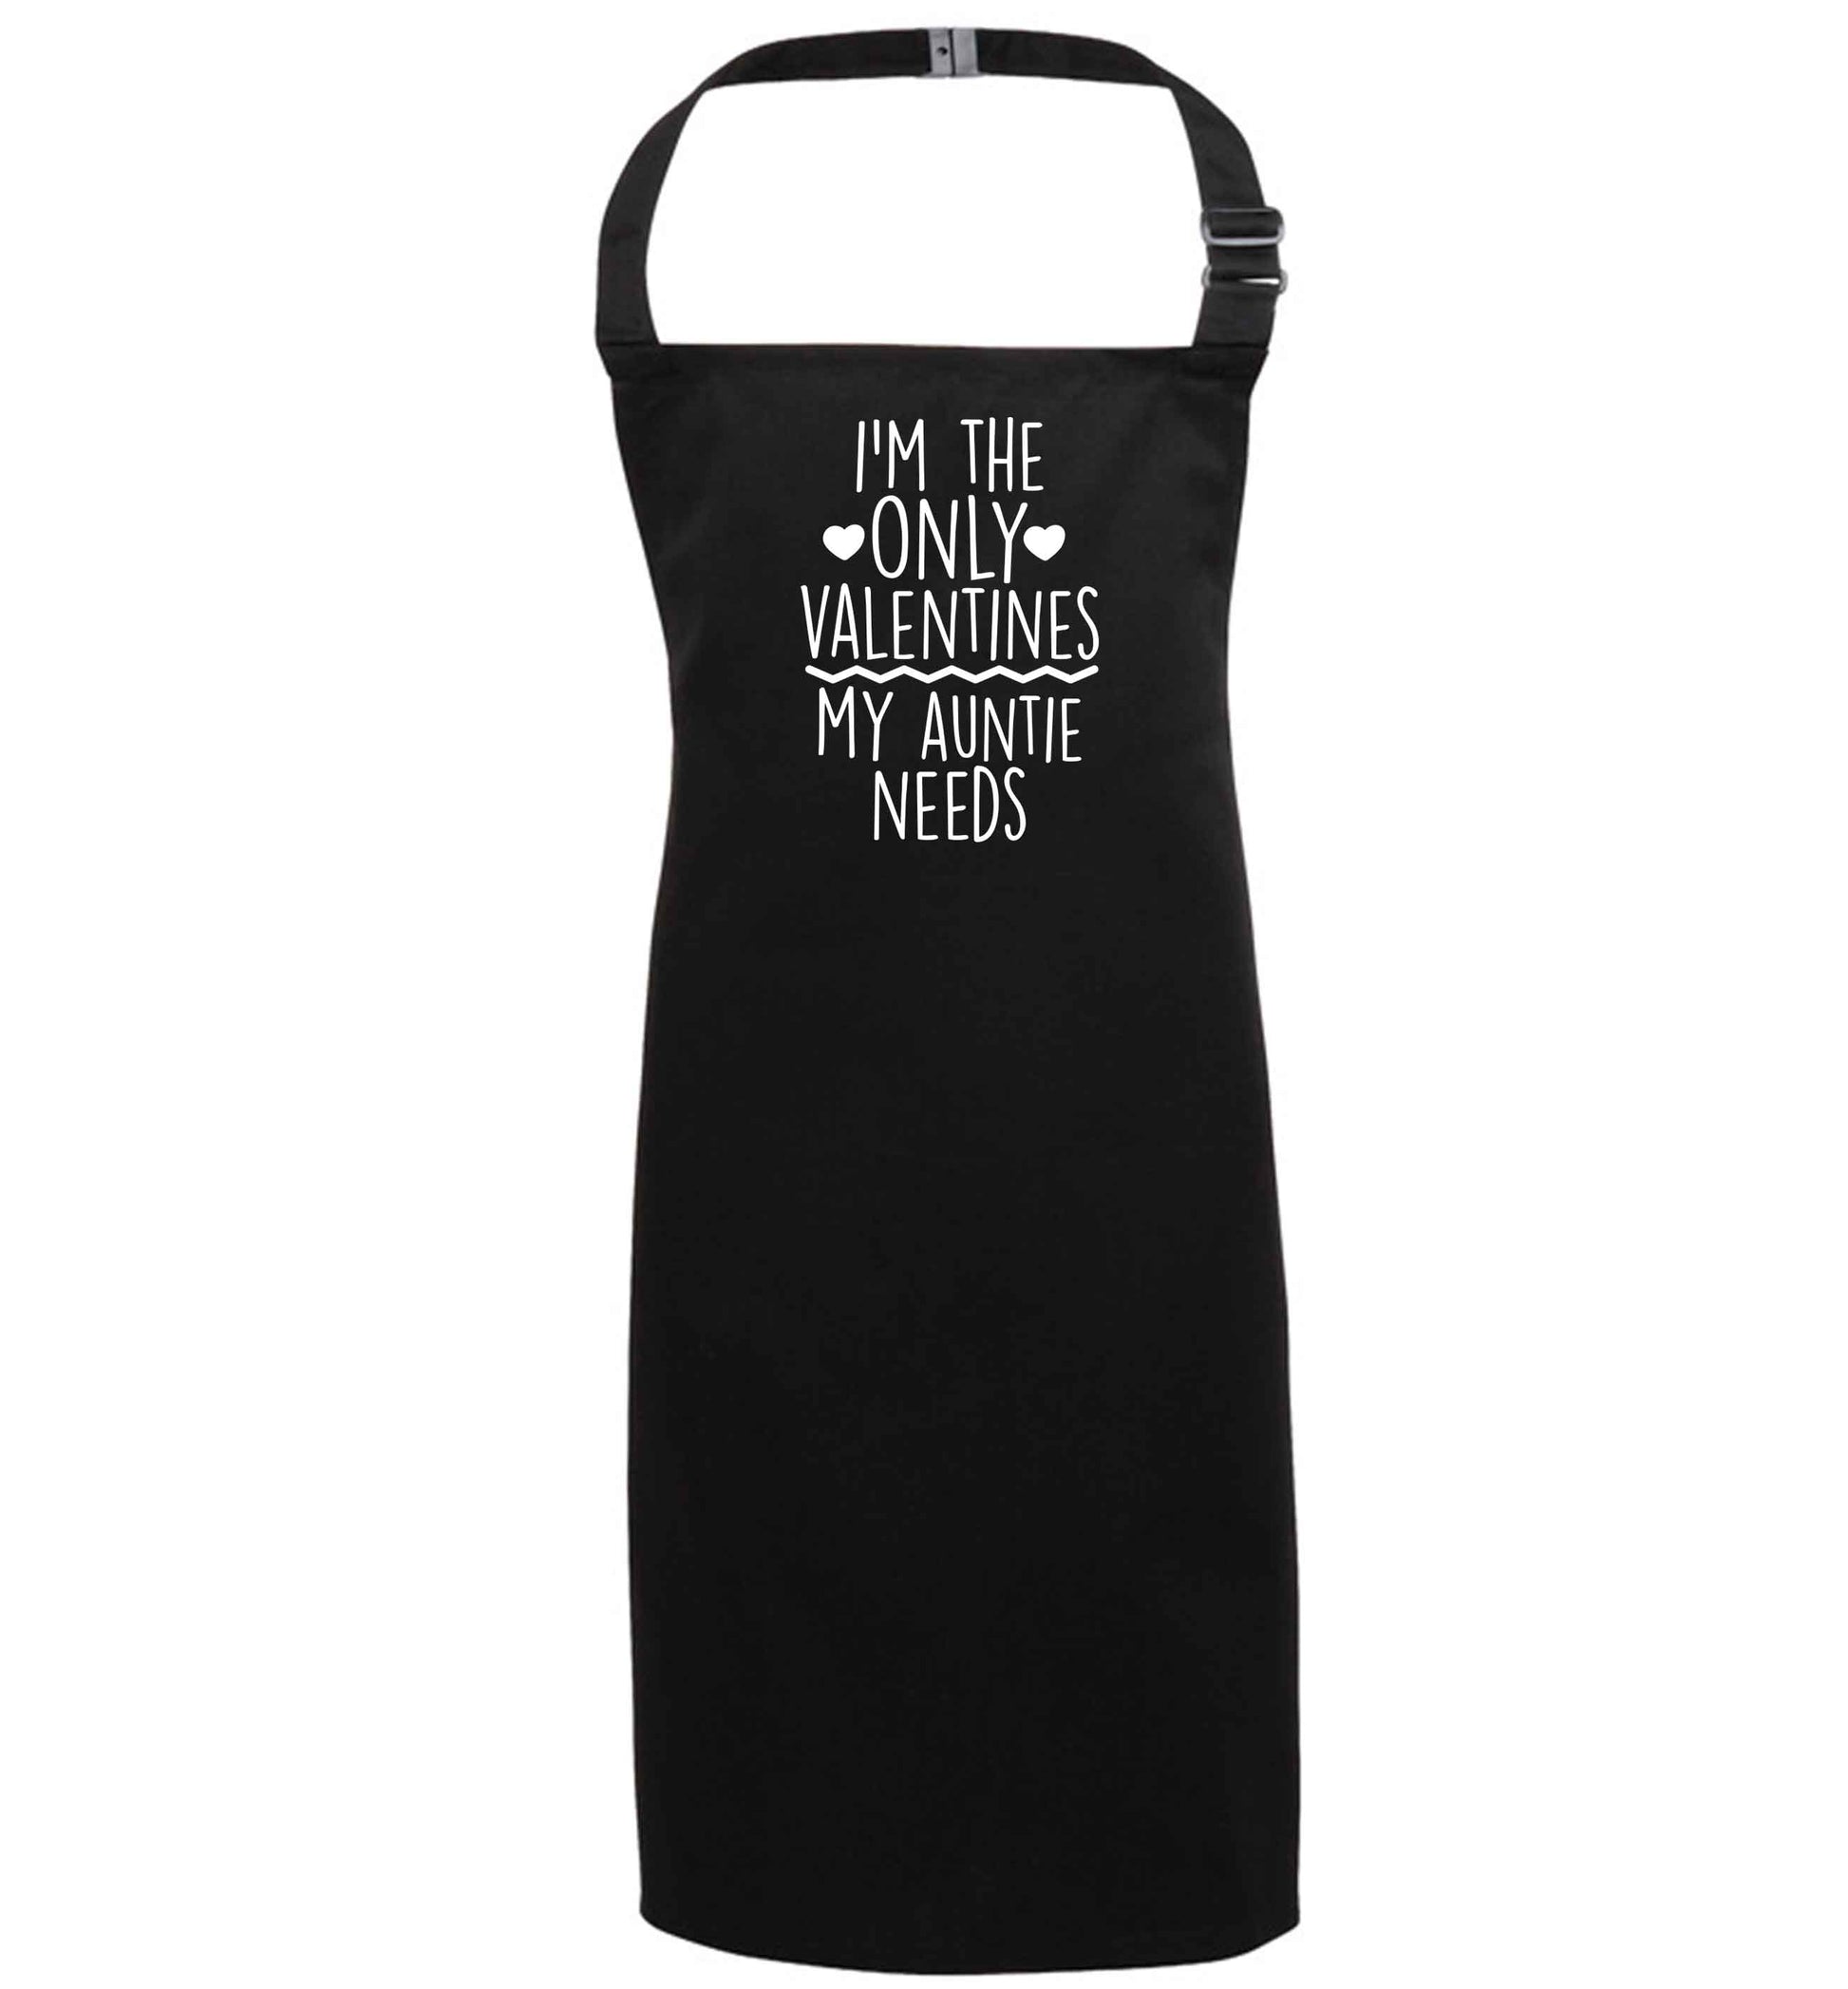 I'm the only valentines my auntie needs black apron 7-10 years